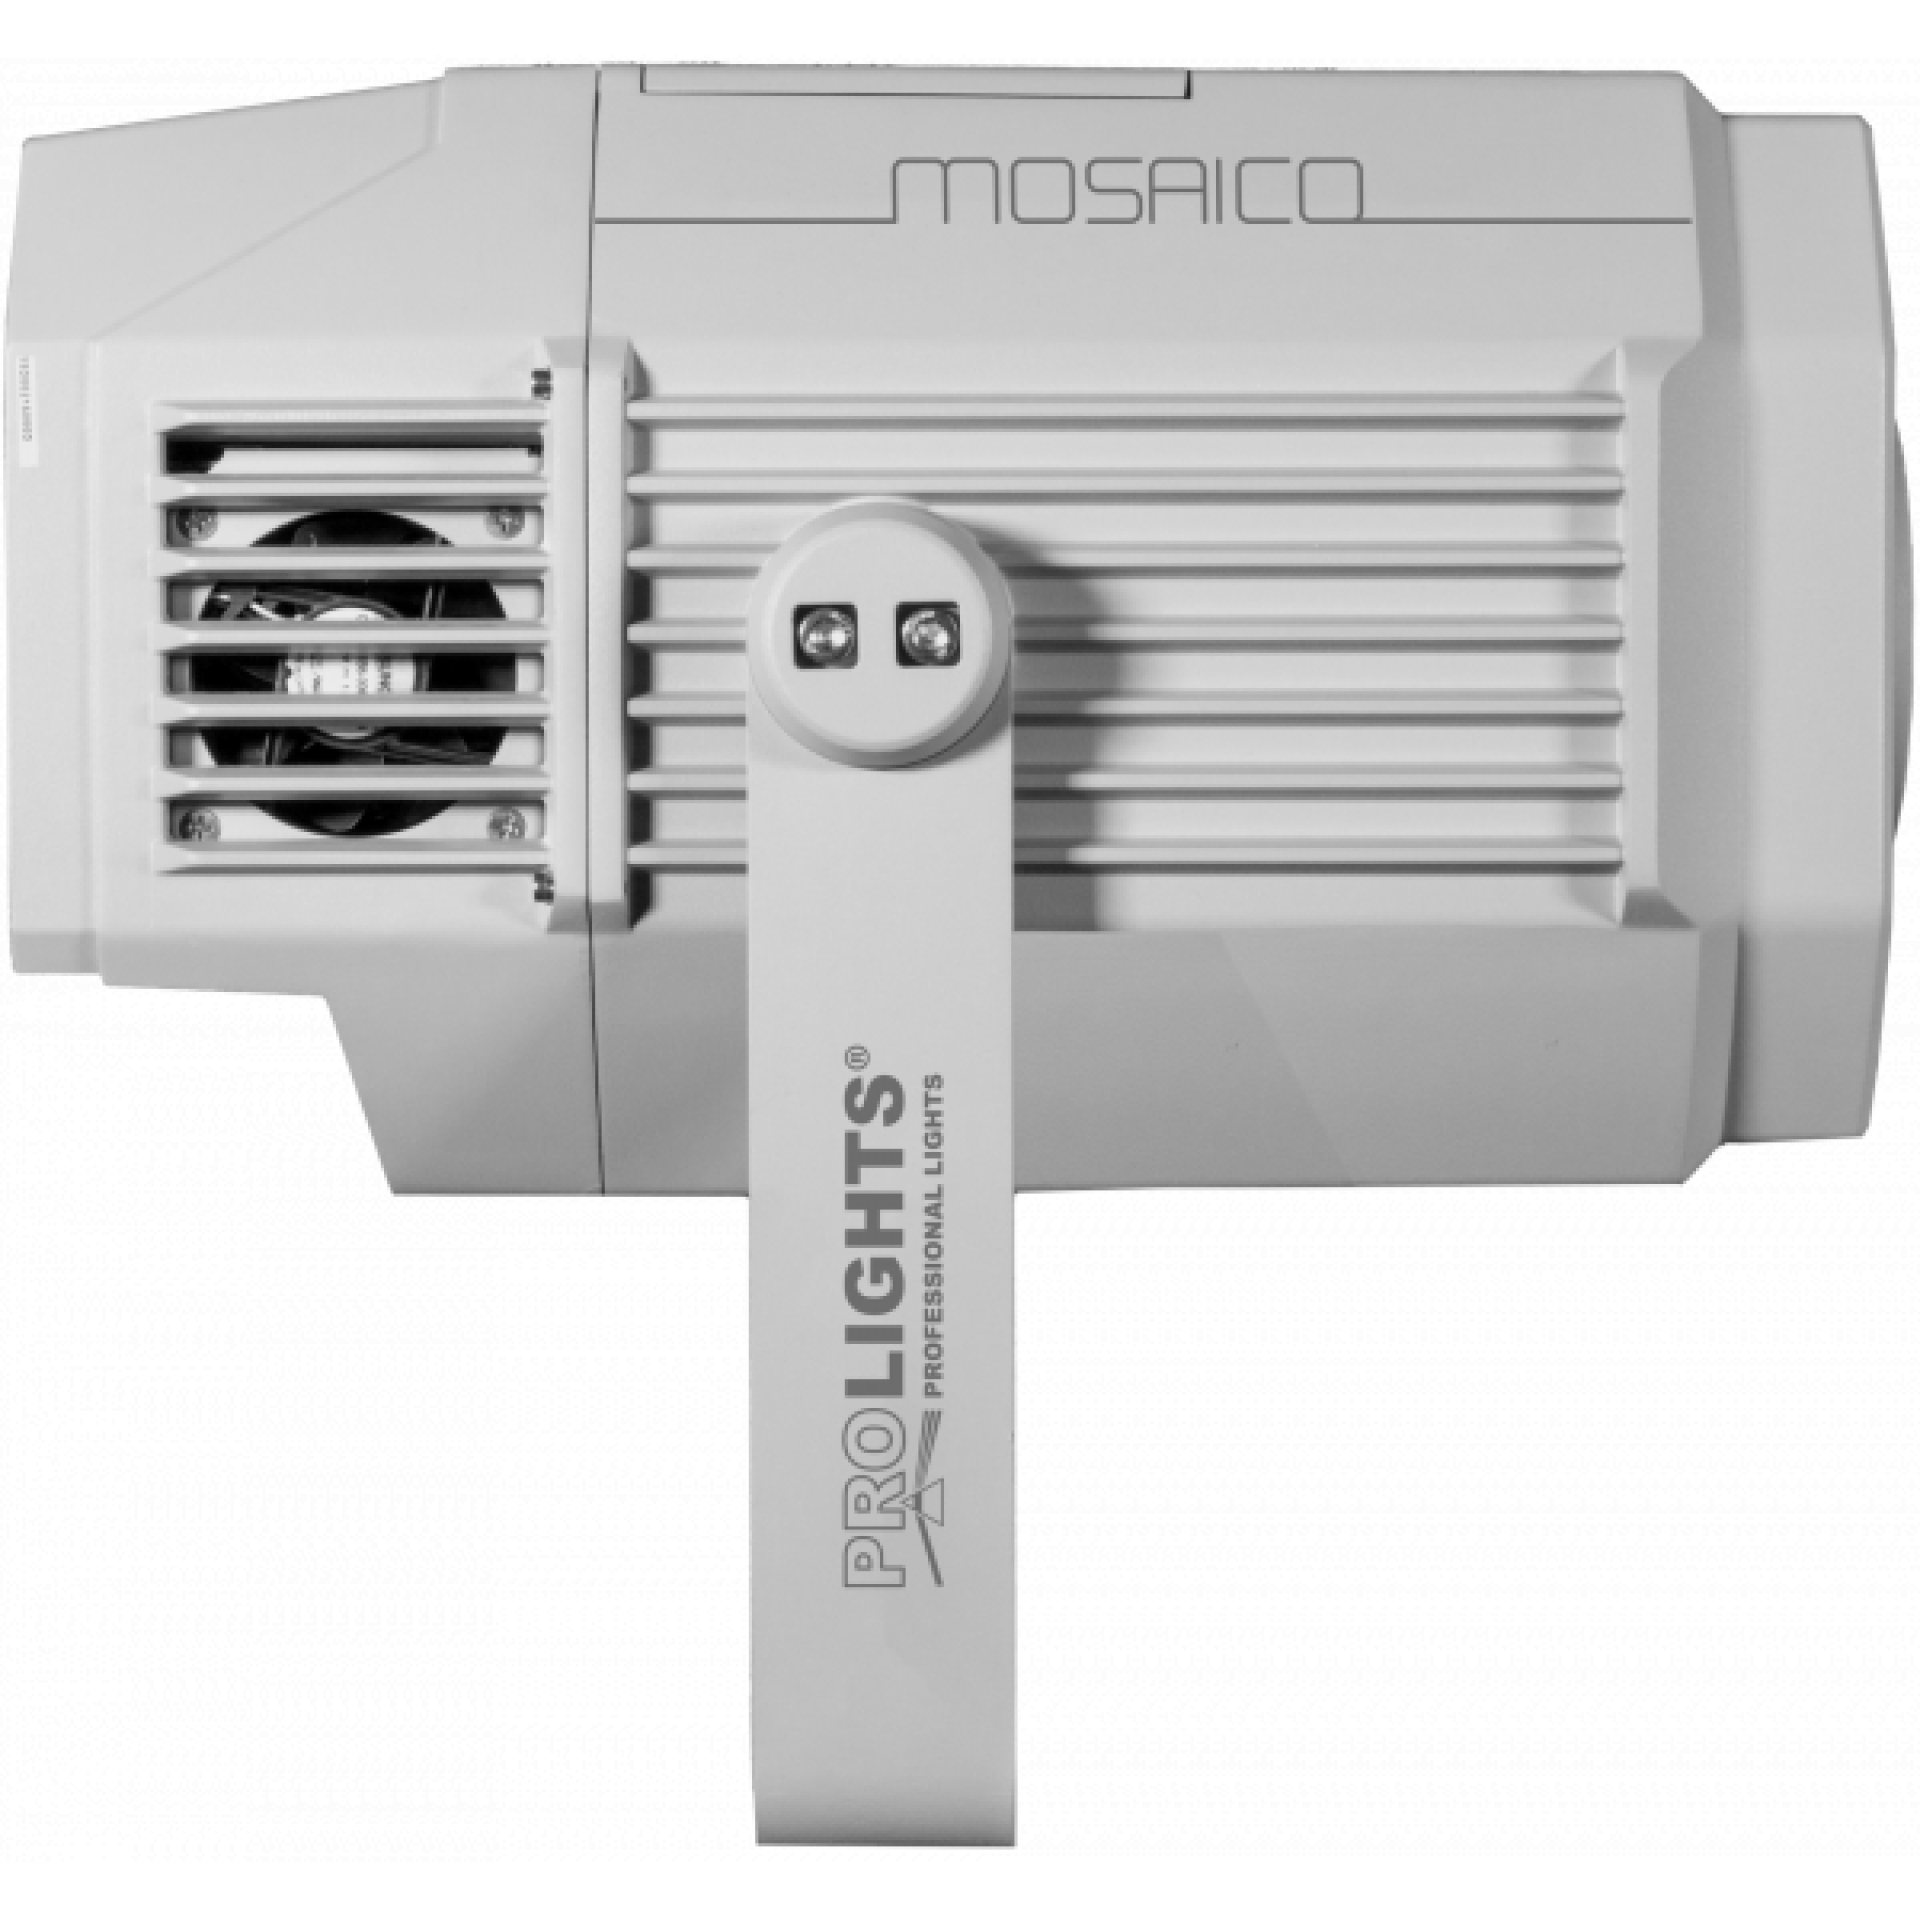 PROLIGHTS Mosaico LED Image Projector - side view